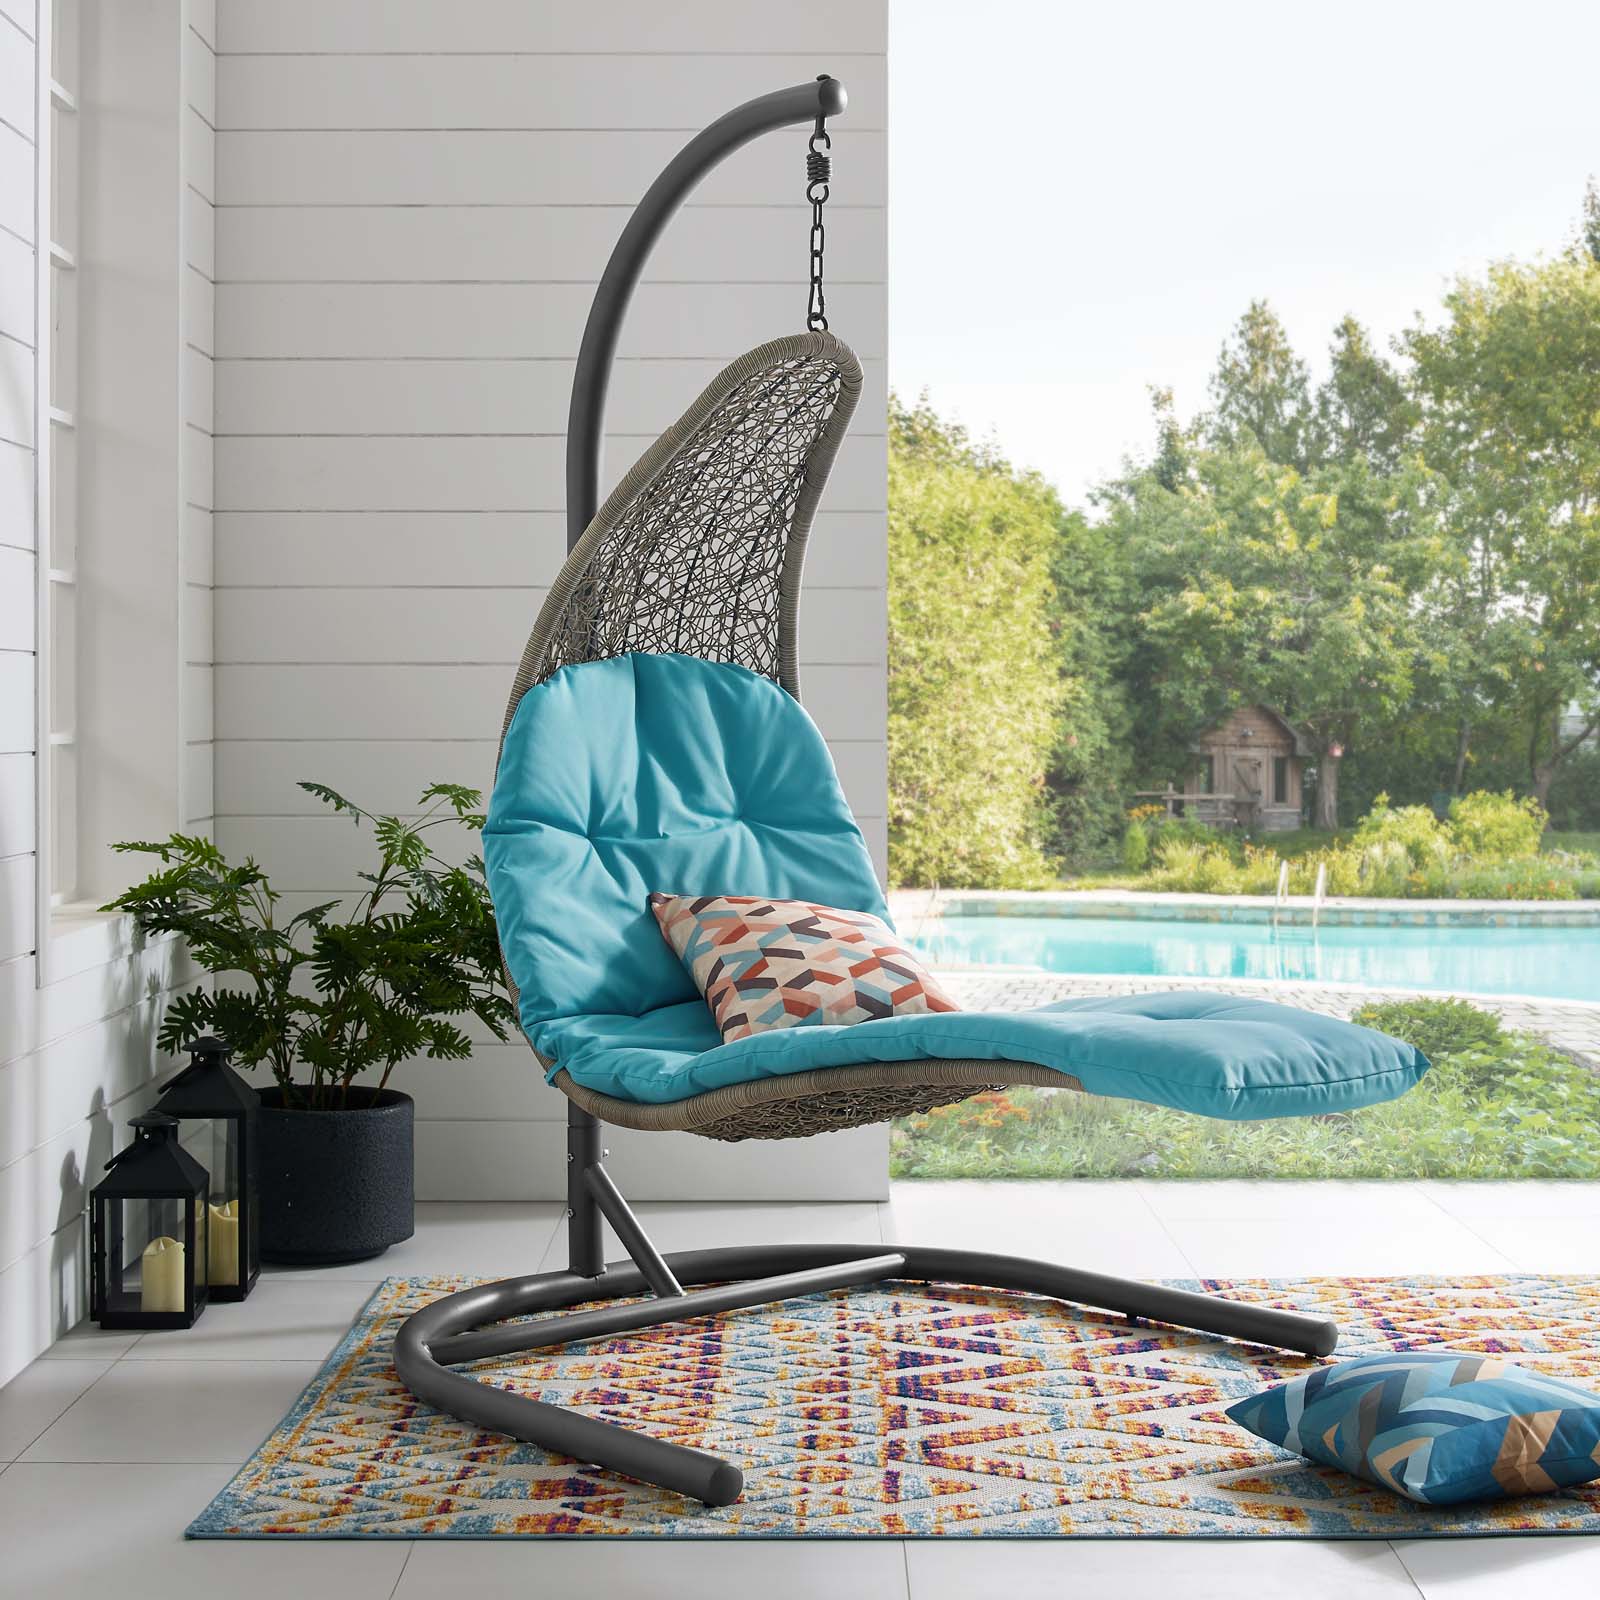 Modway Landscape Outdoor Patio Hanging Chaise Lounge Swing Chair, Multiple Colors - image 1 of 6